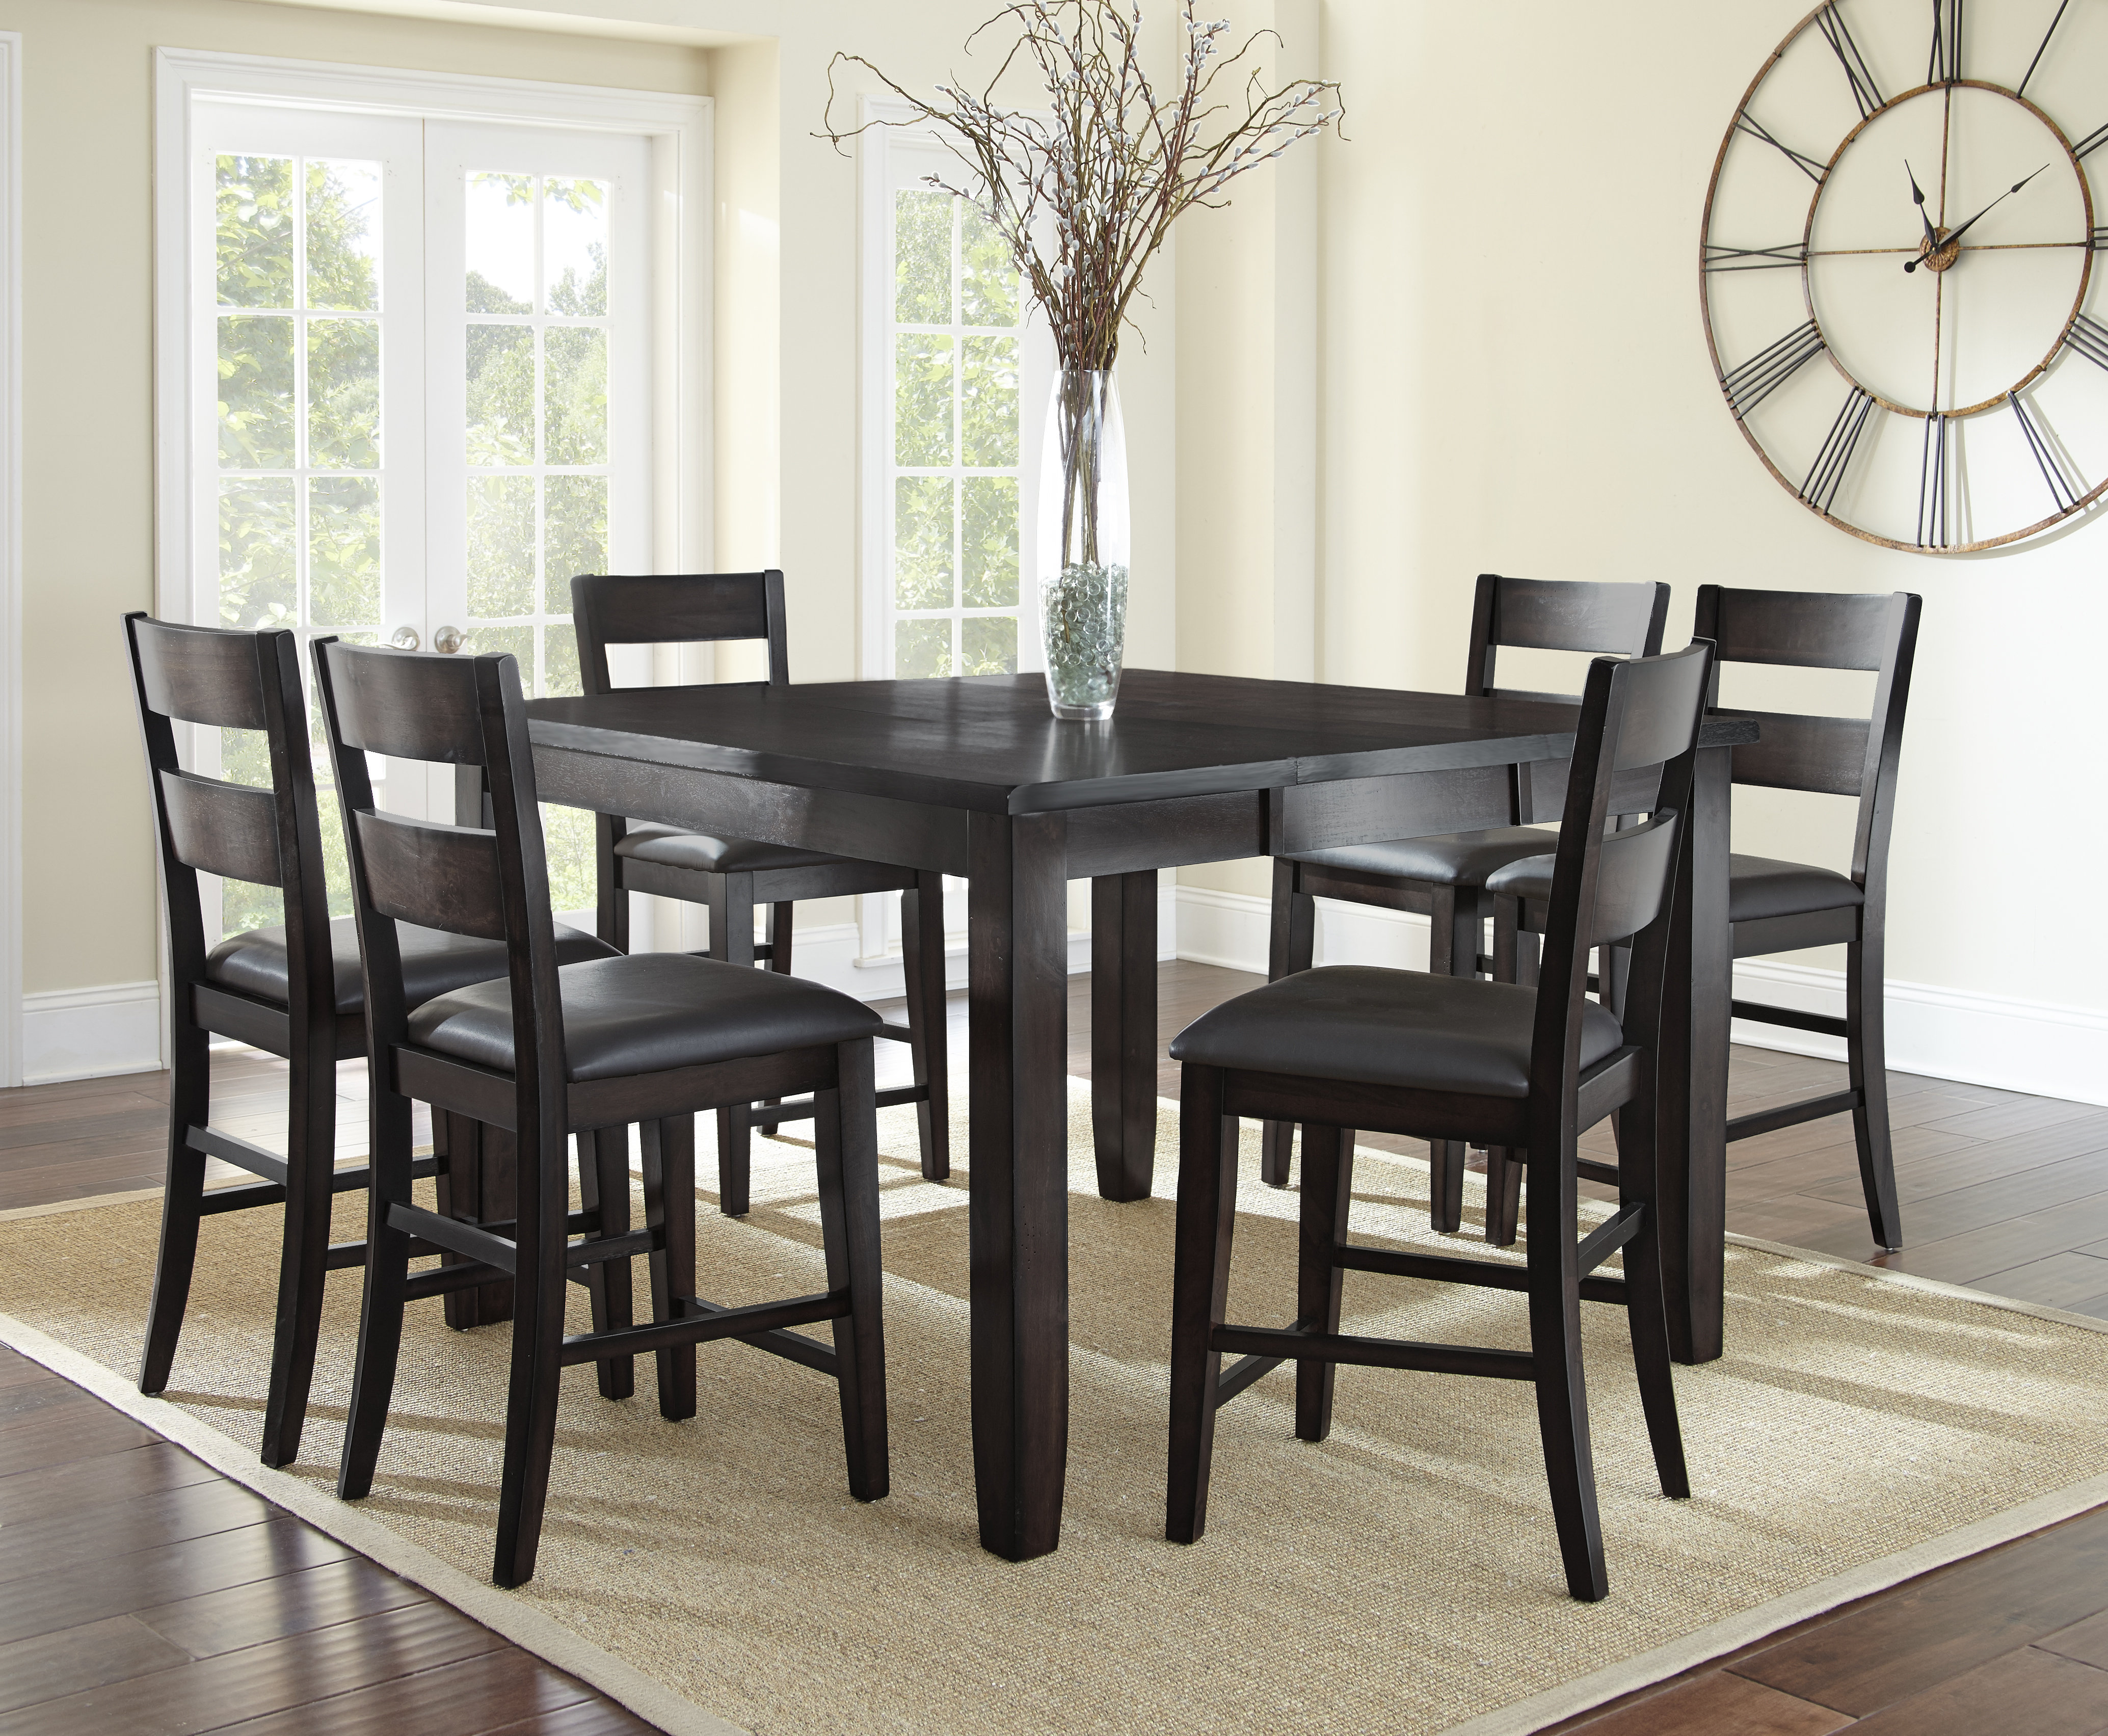 Wynwood 7 Piece Counter Height Solid Wood Dining Set